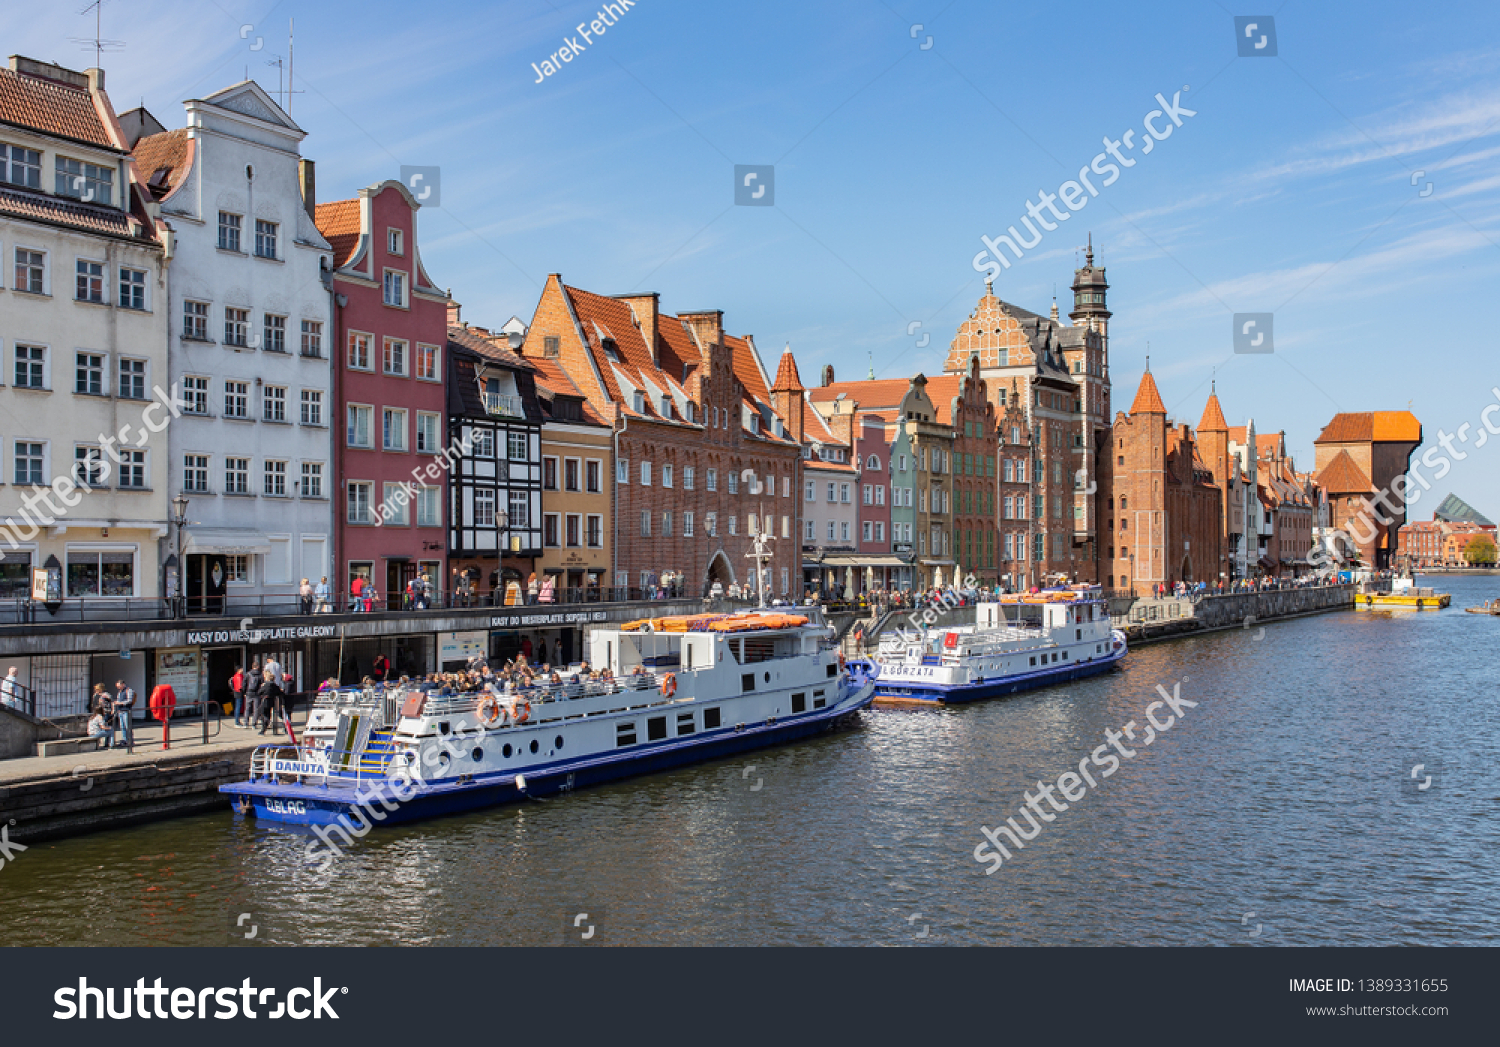 Gdansk, Poland - 20 April 2019: Old town of Gdansk, Motlawa river and popular promenade with tourist ships offering sightseeing trips. #1389331655